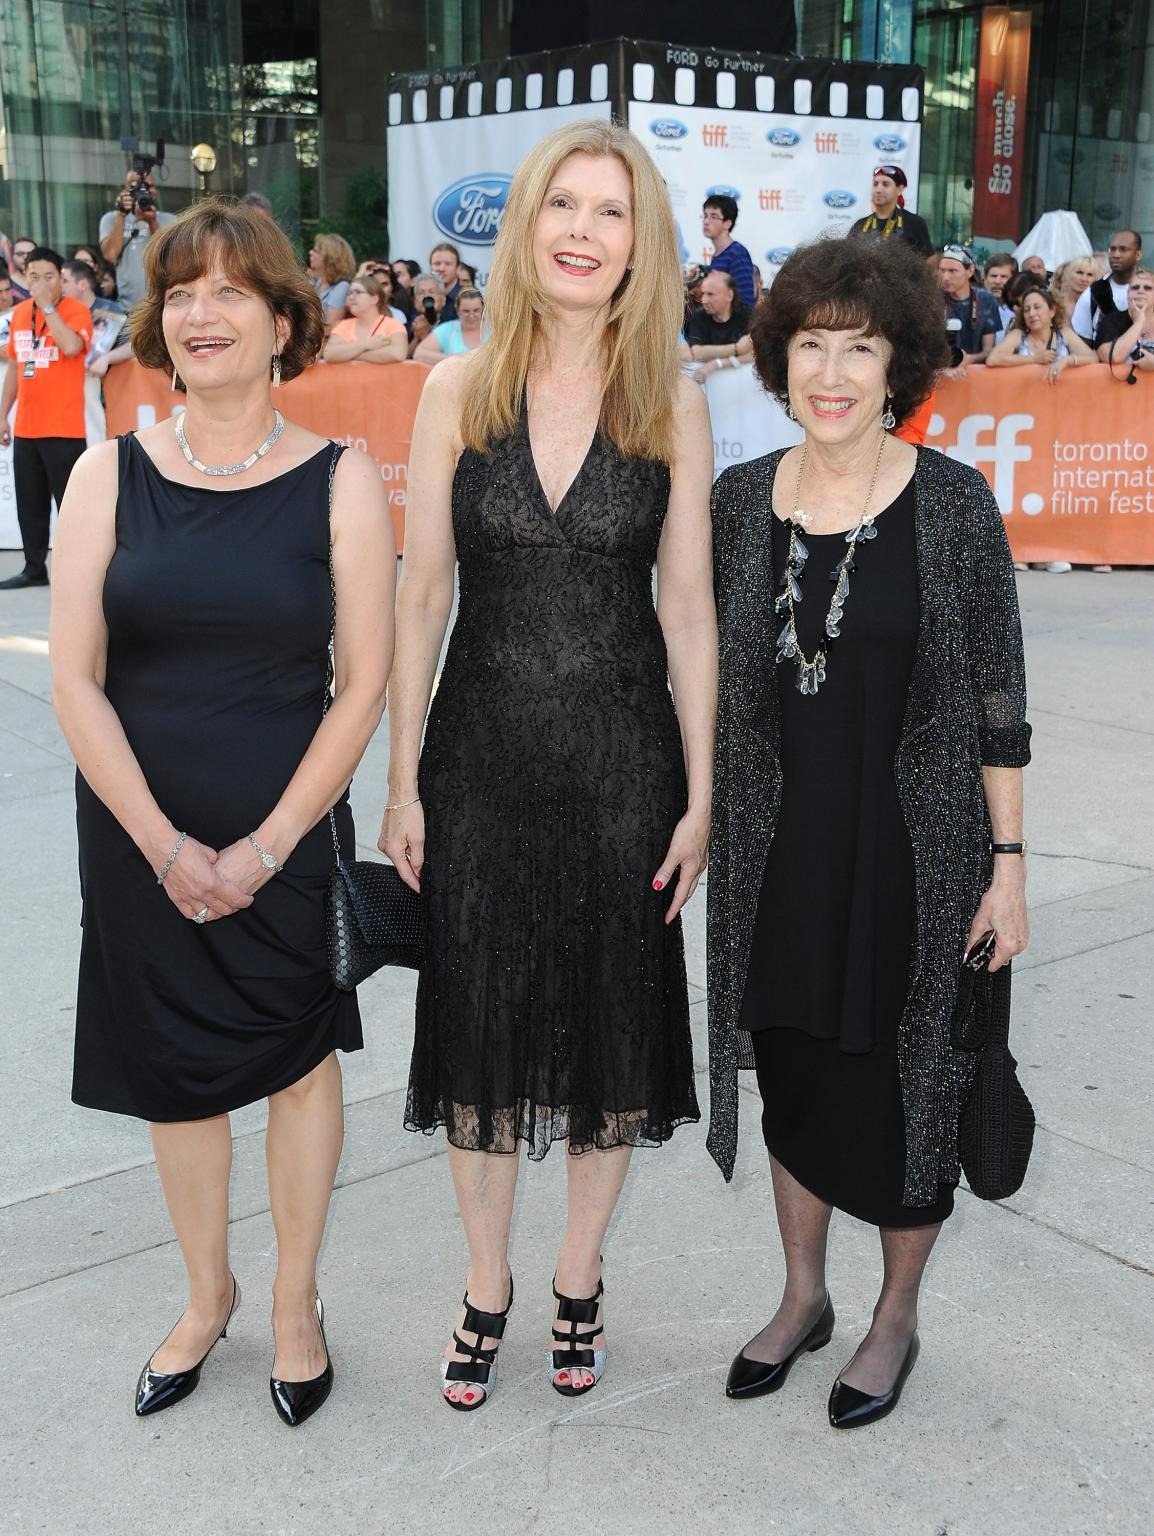 Producer Carol Baum (right) said Sydney Sweeney “isn’t pretty” and “can’t act” during a discussion last week, according to the Daily Mail.